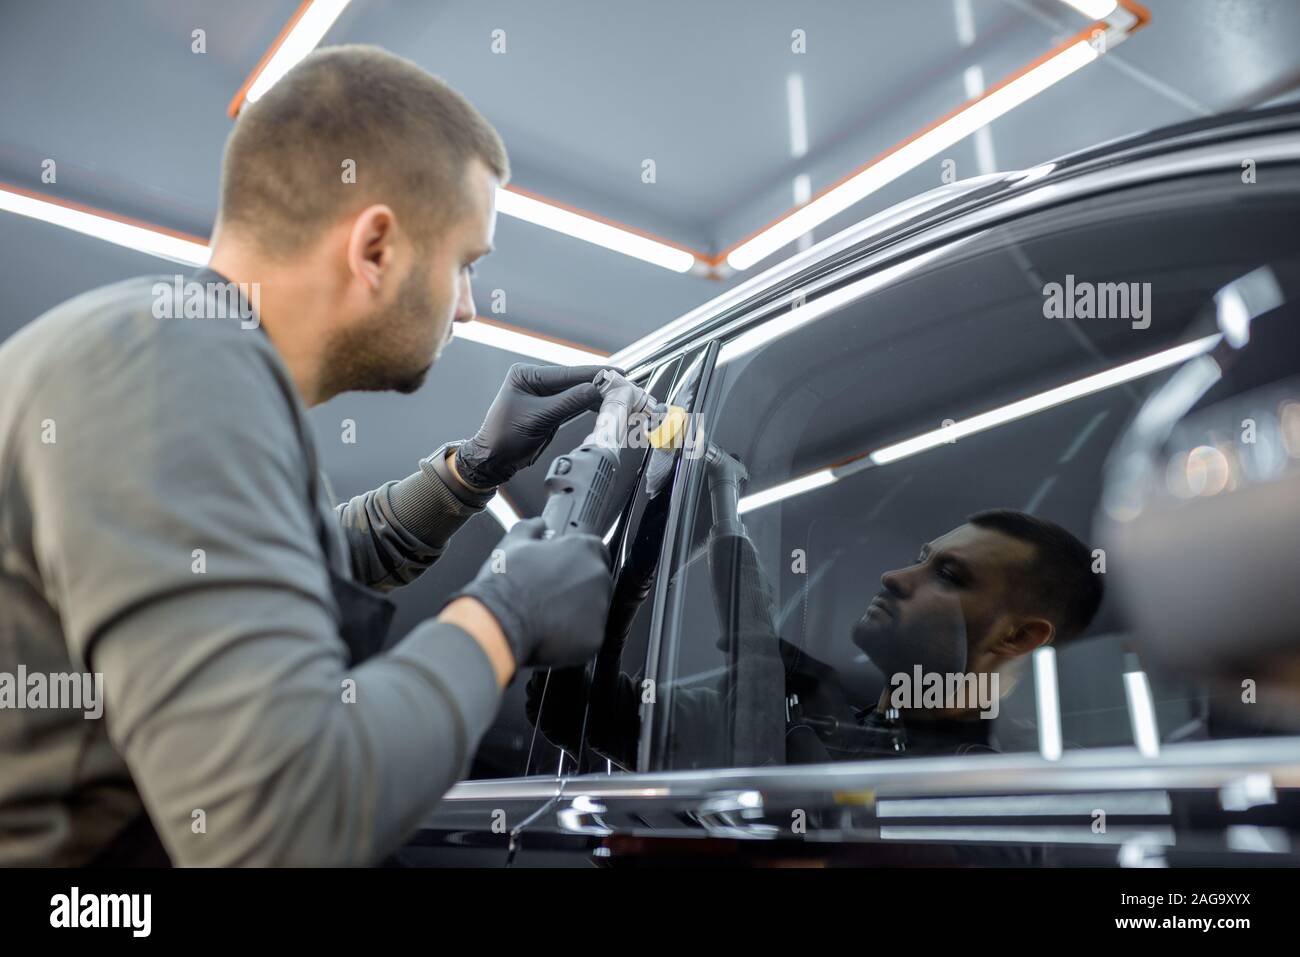 Car service worker polishing vehicle body with special wax from scratches. Professional car detailing and maintenance concept Stock Photo